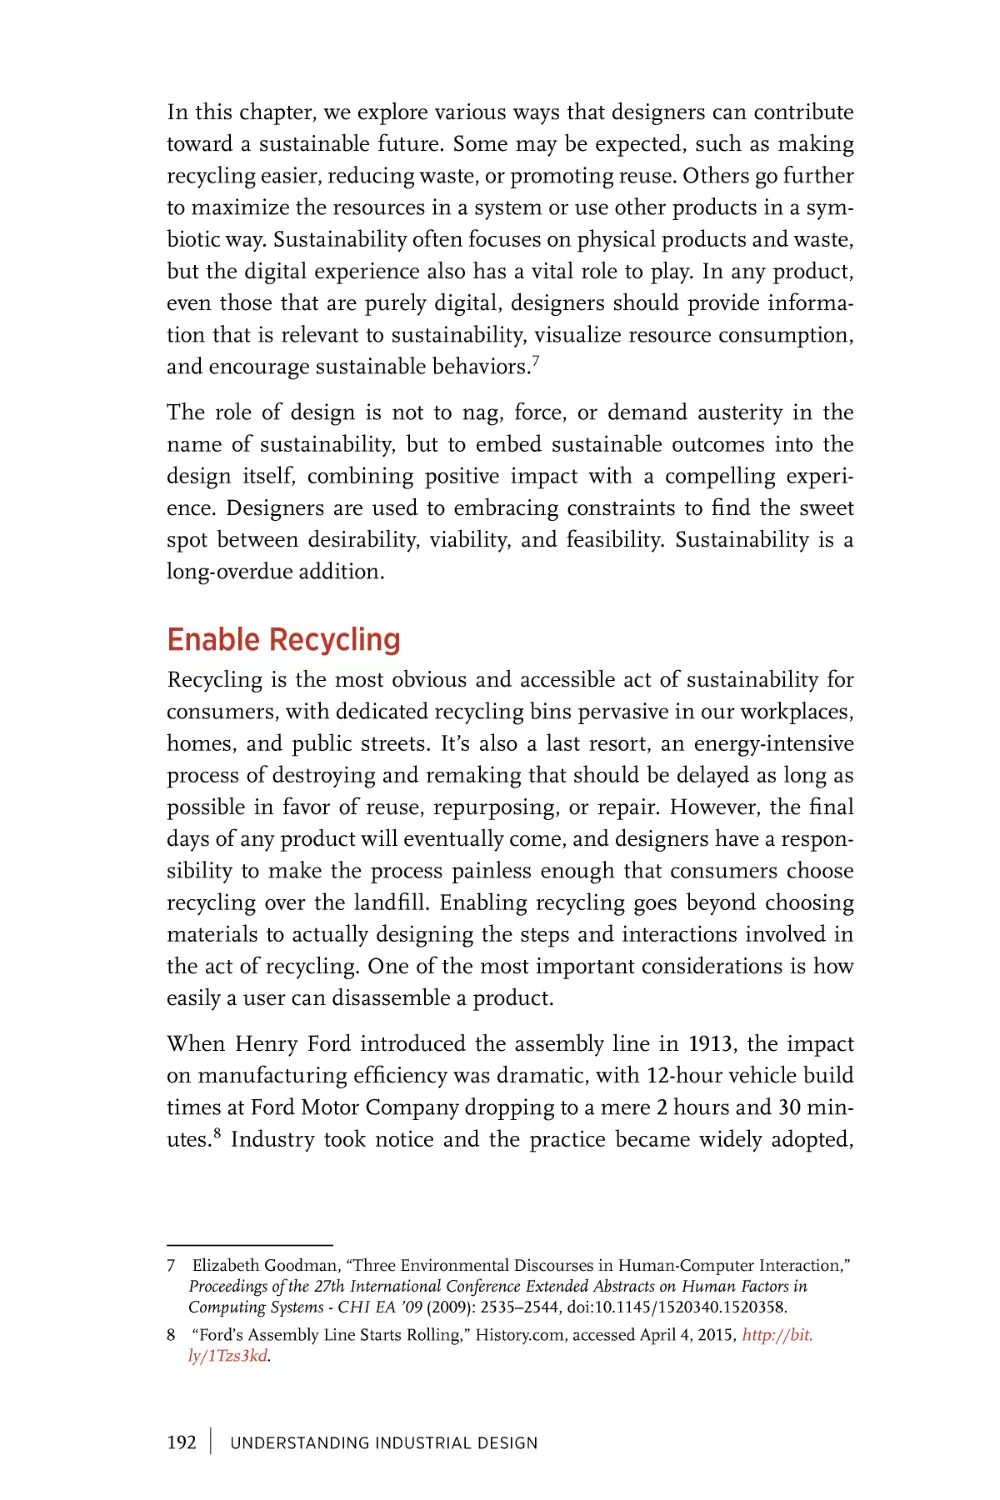 Enable Recycling